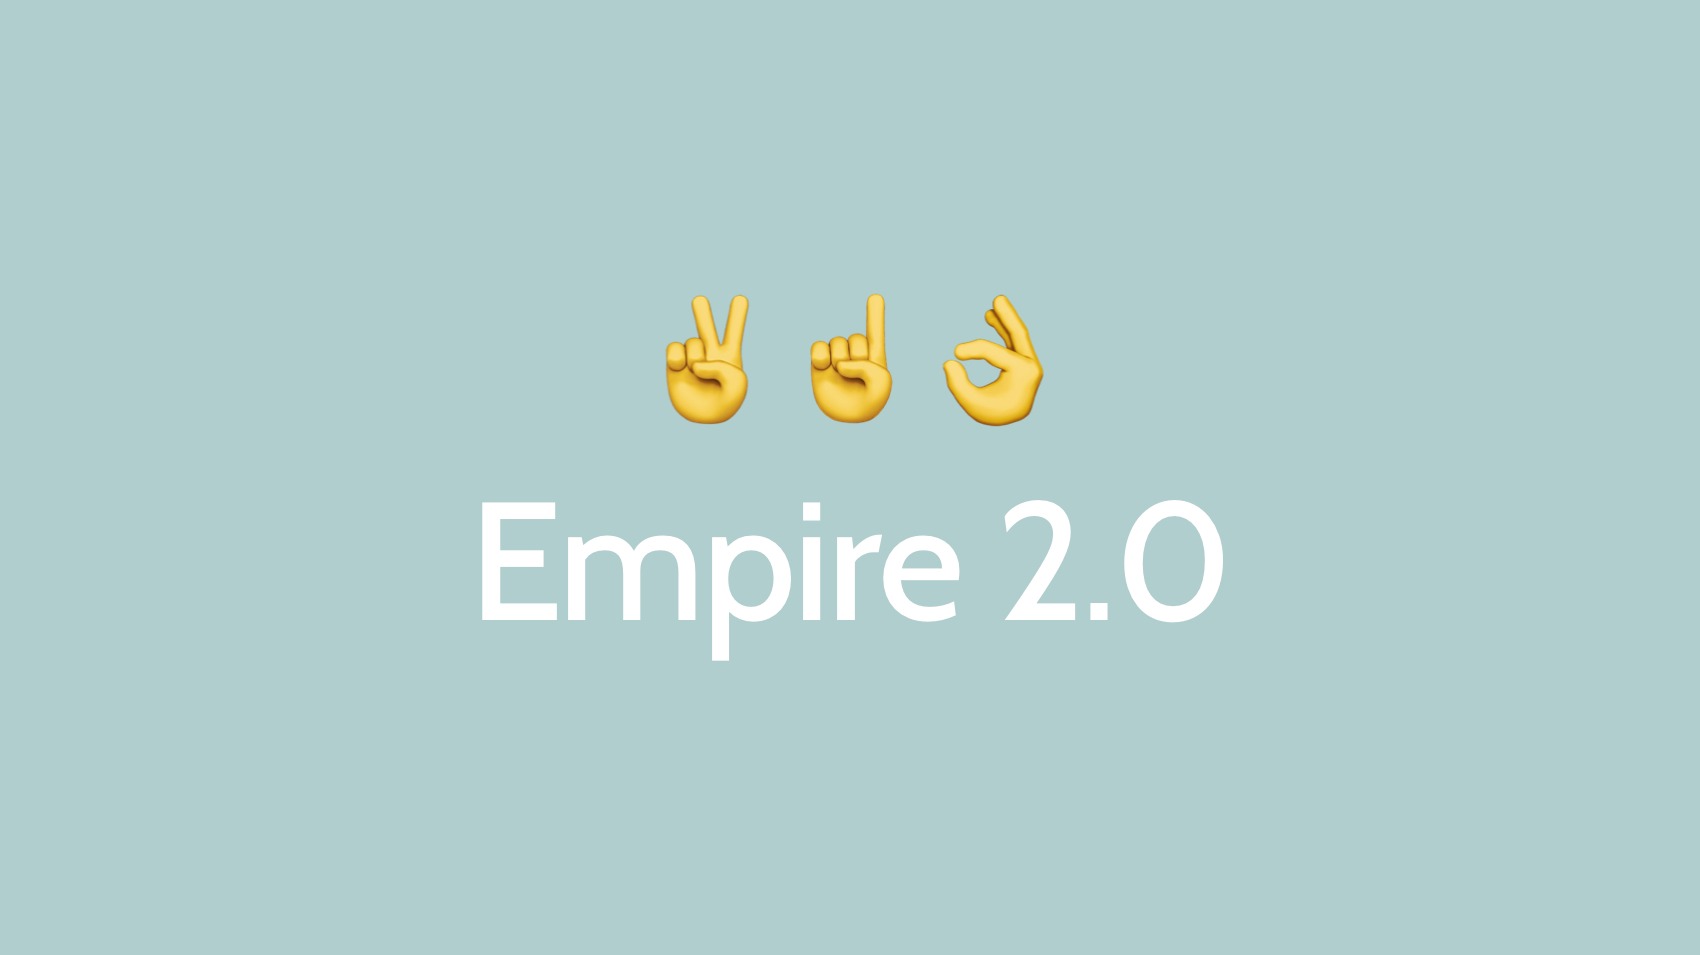 Empire 2.0: Now with even more features and flexibility